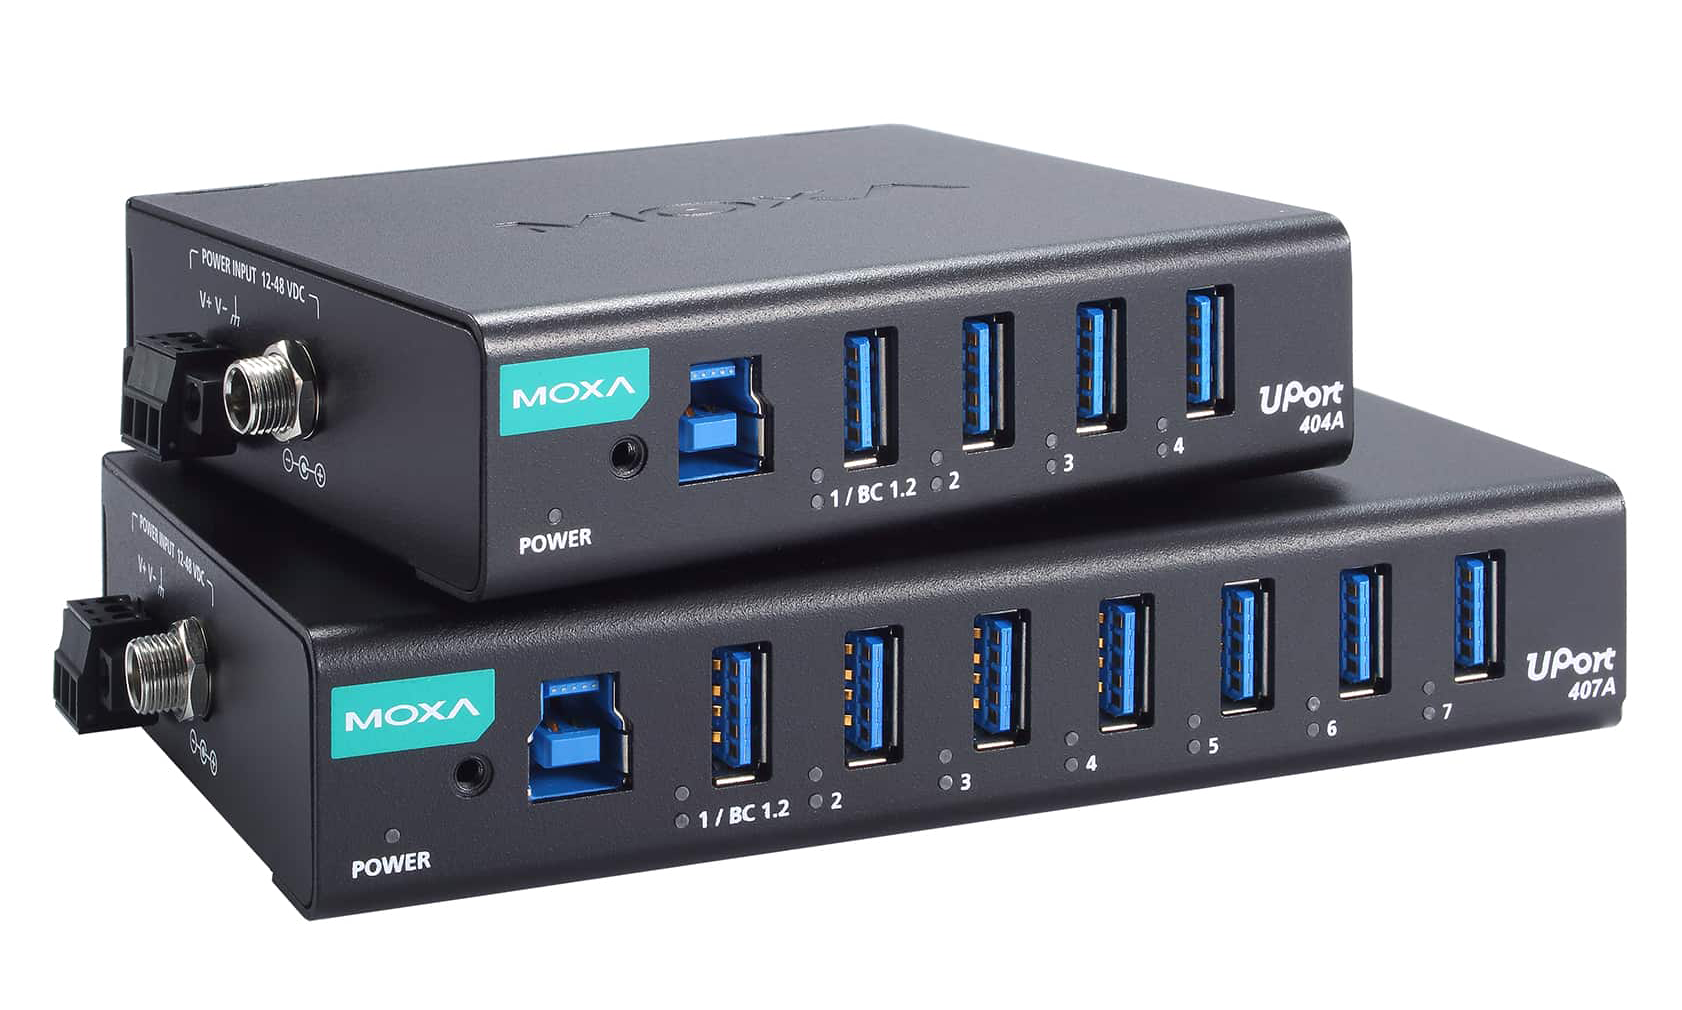 MOXA UPort 400A Series